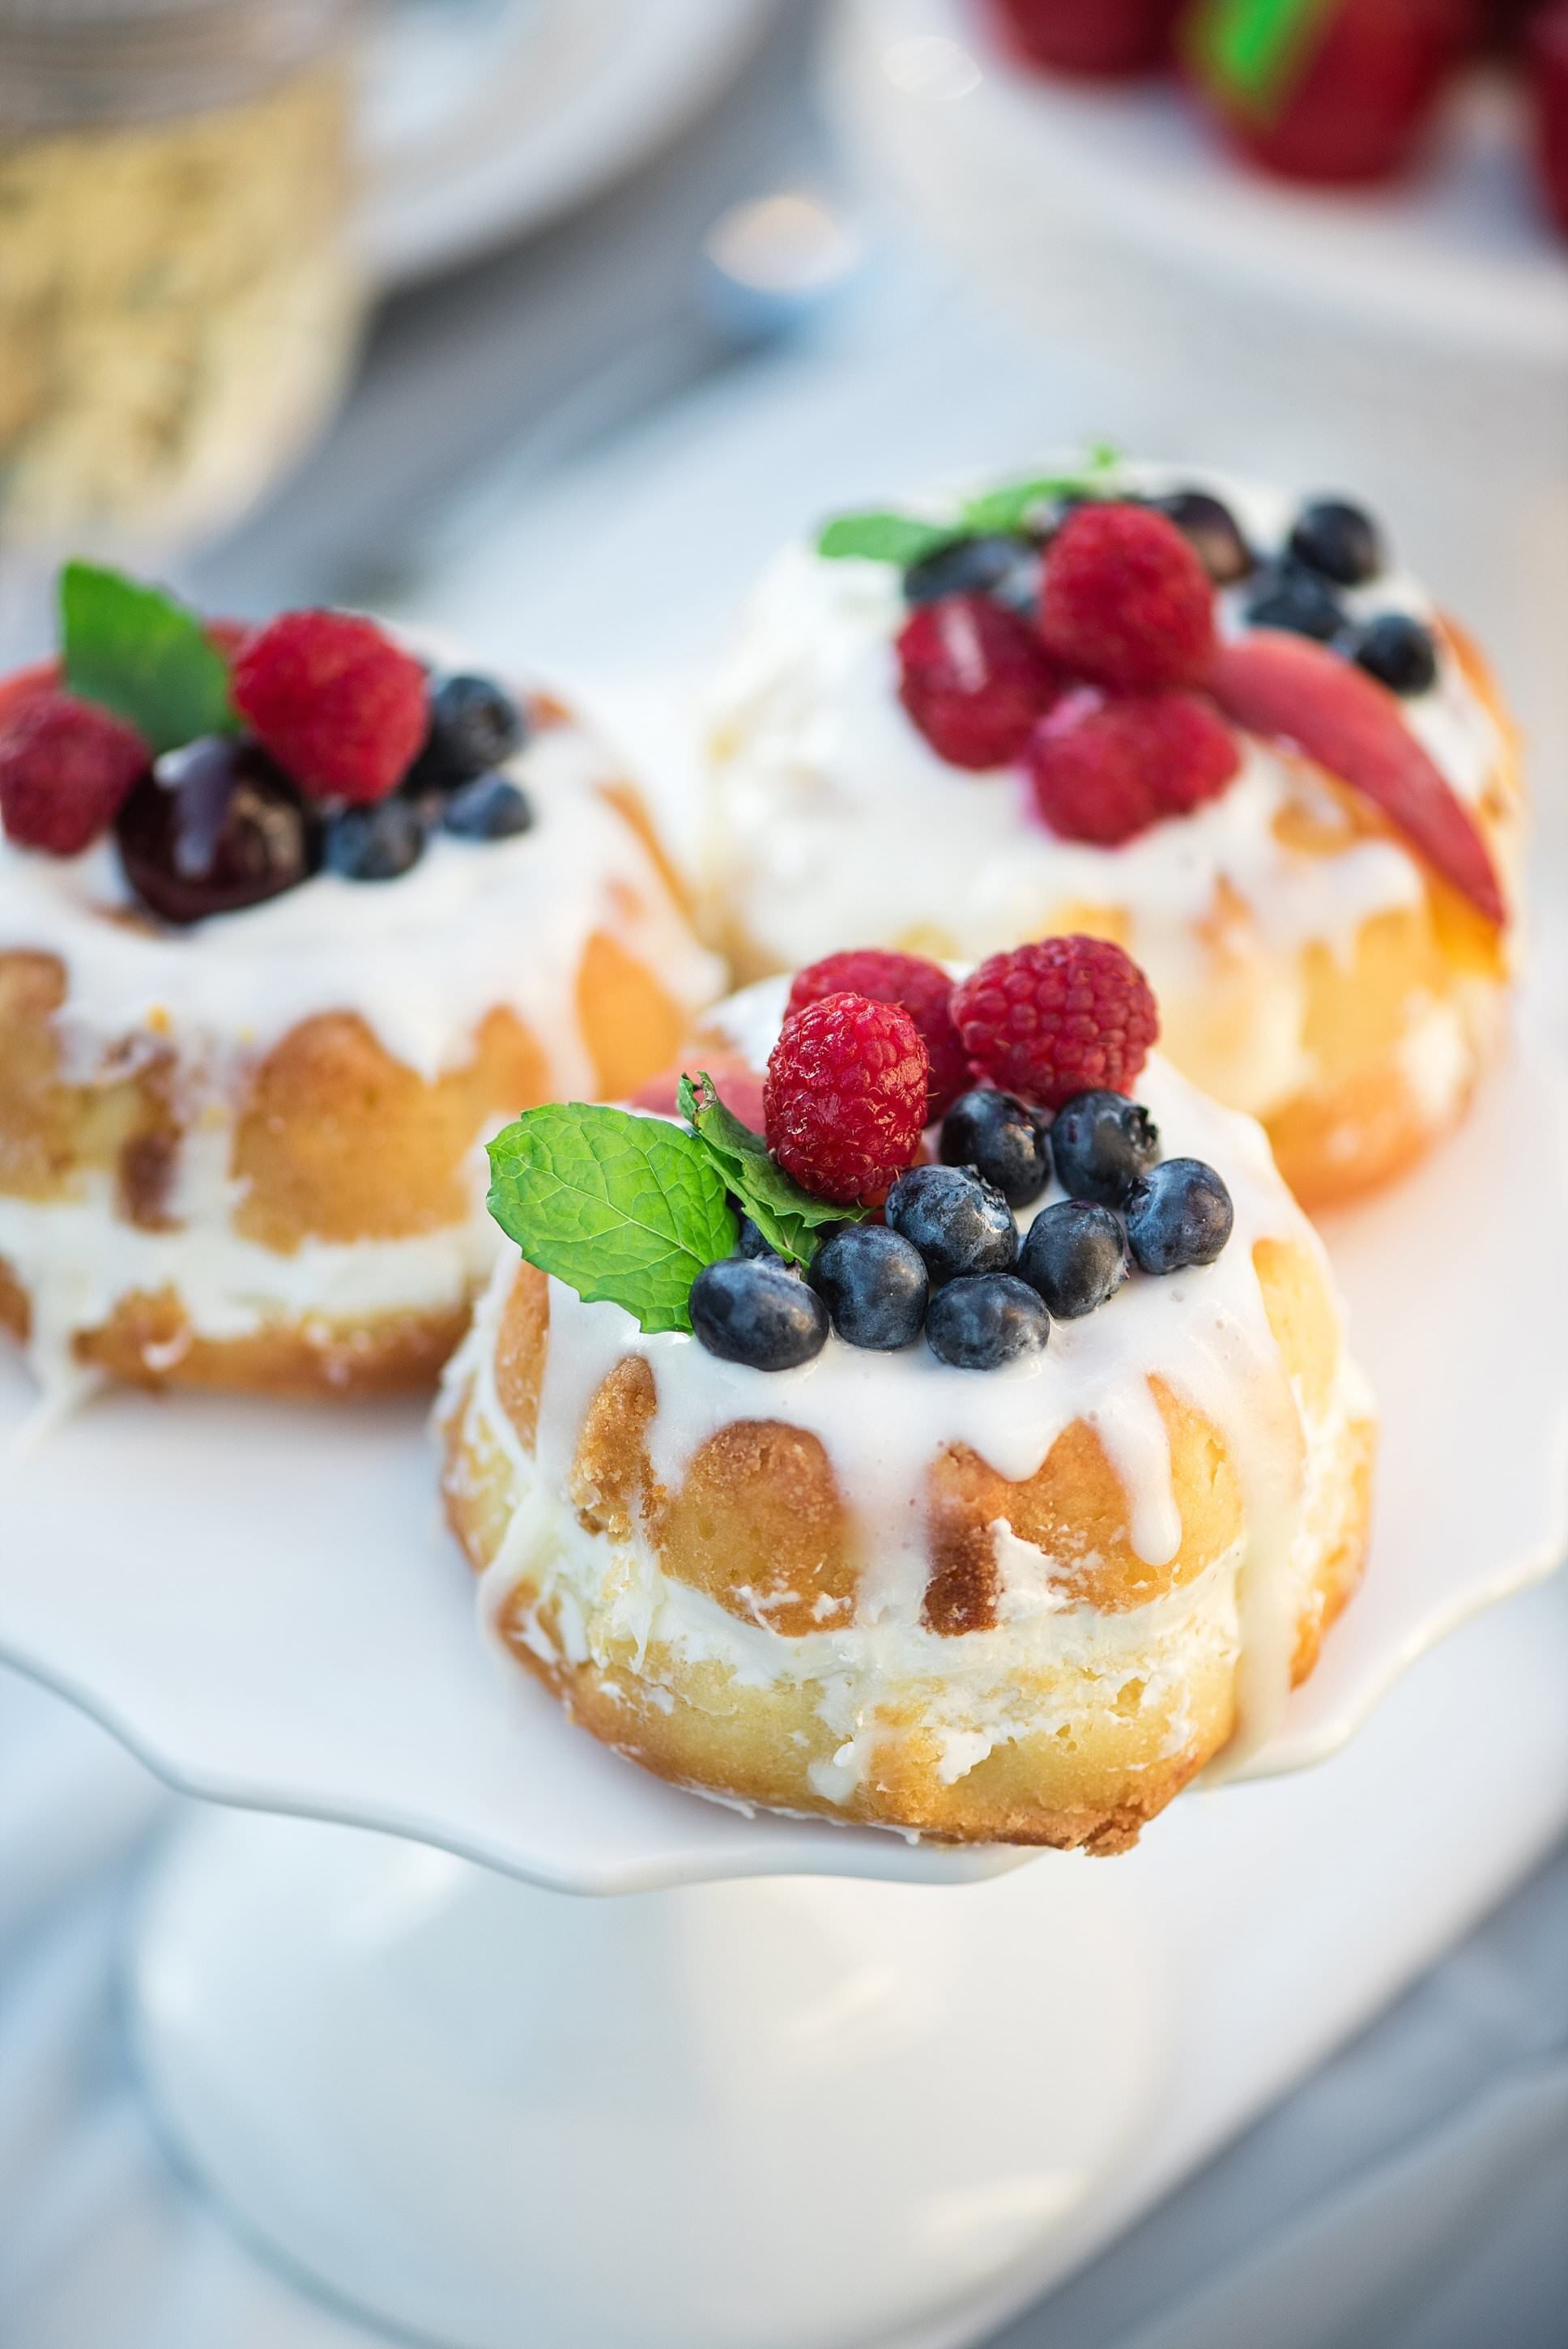 Mini bundt cakes with frosting drizzle and raspberry, blueberry and mint sprigs